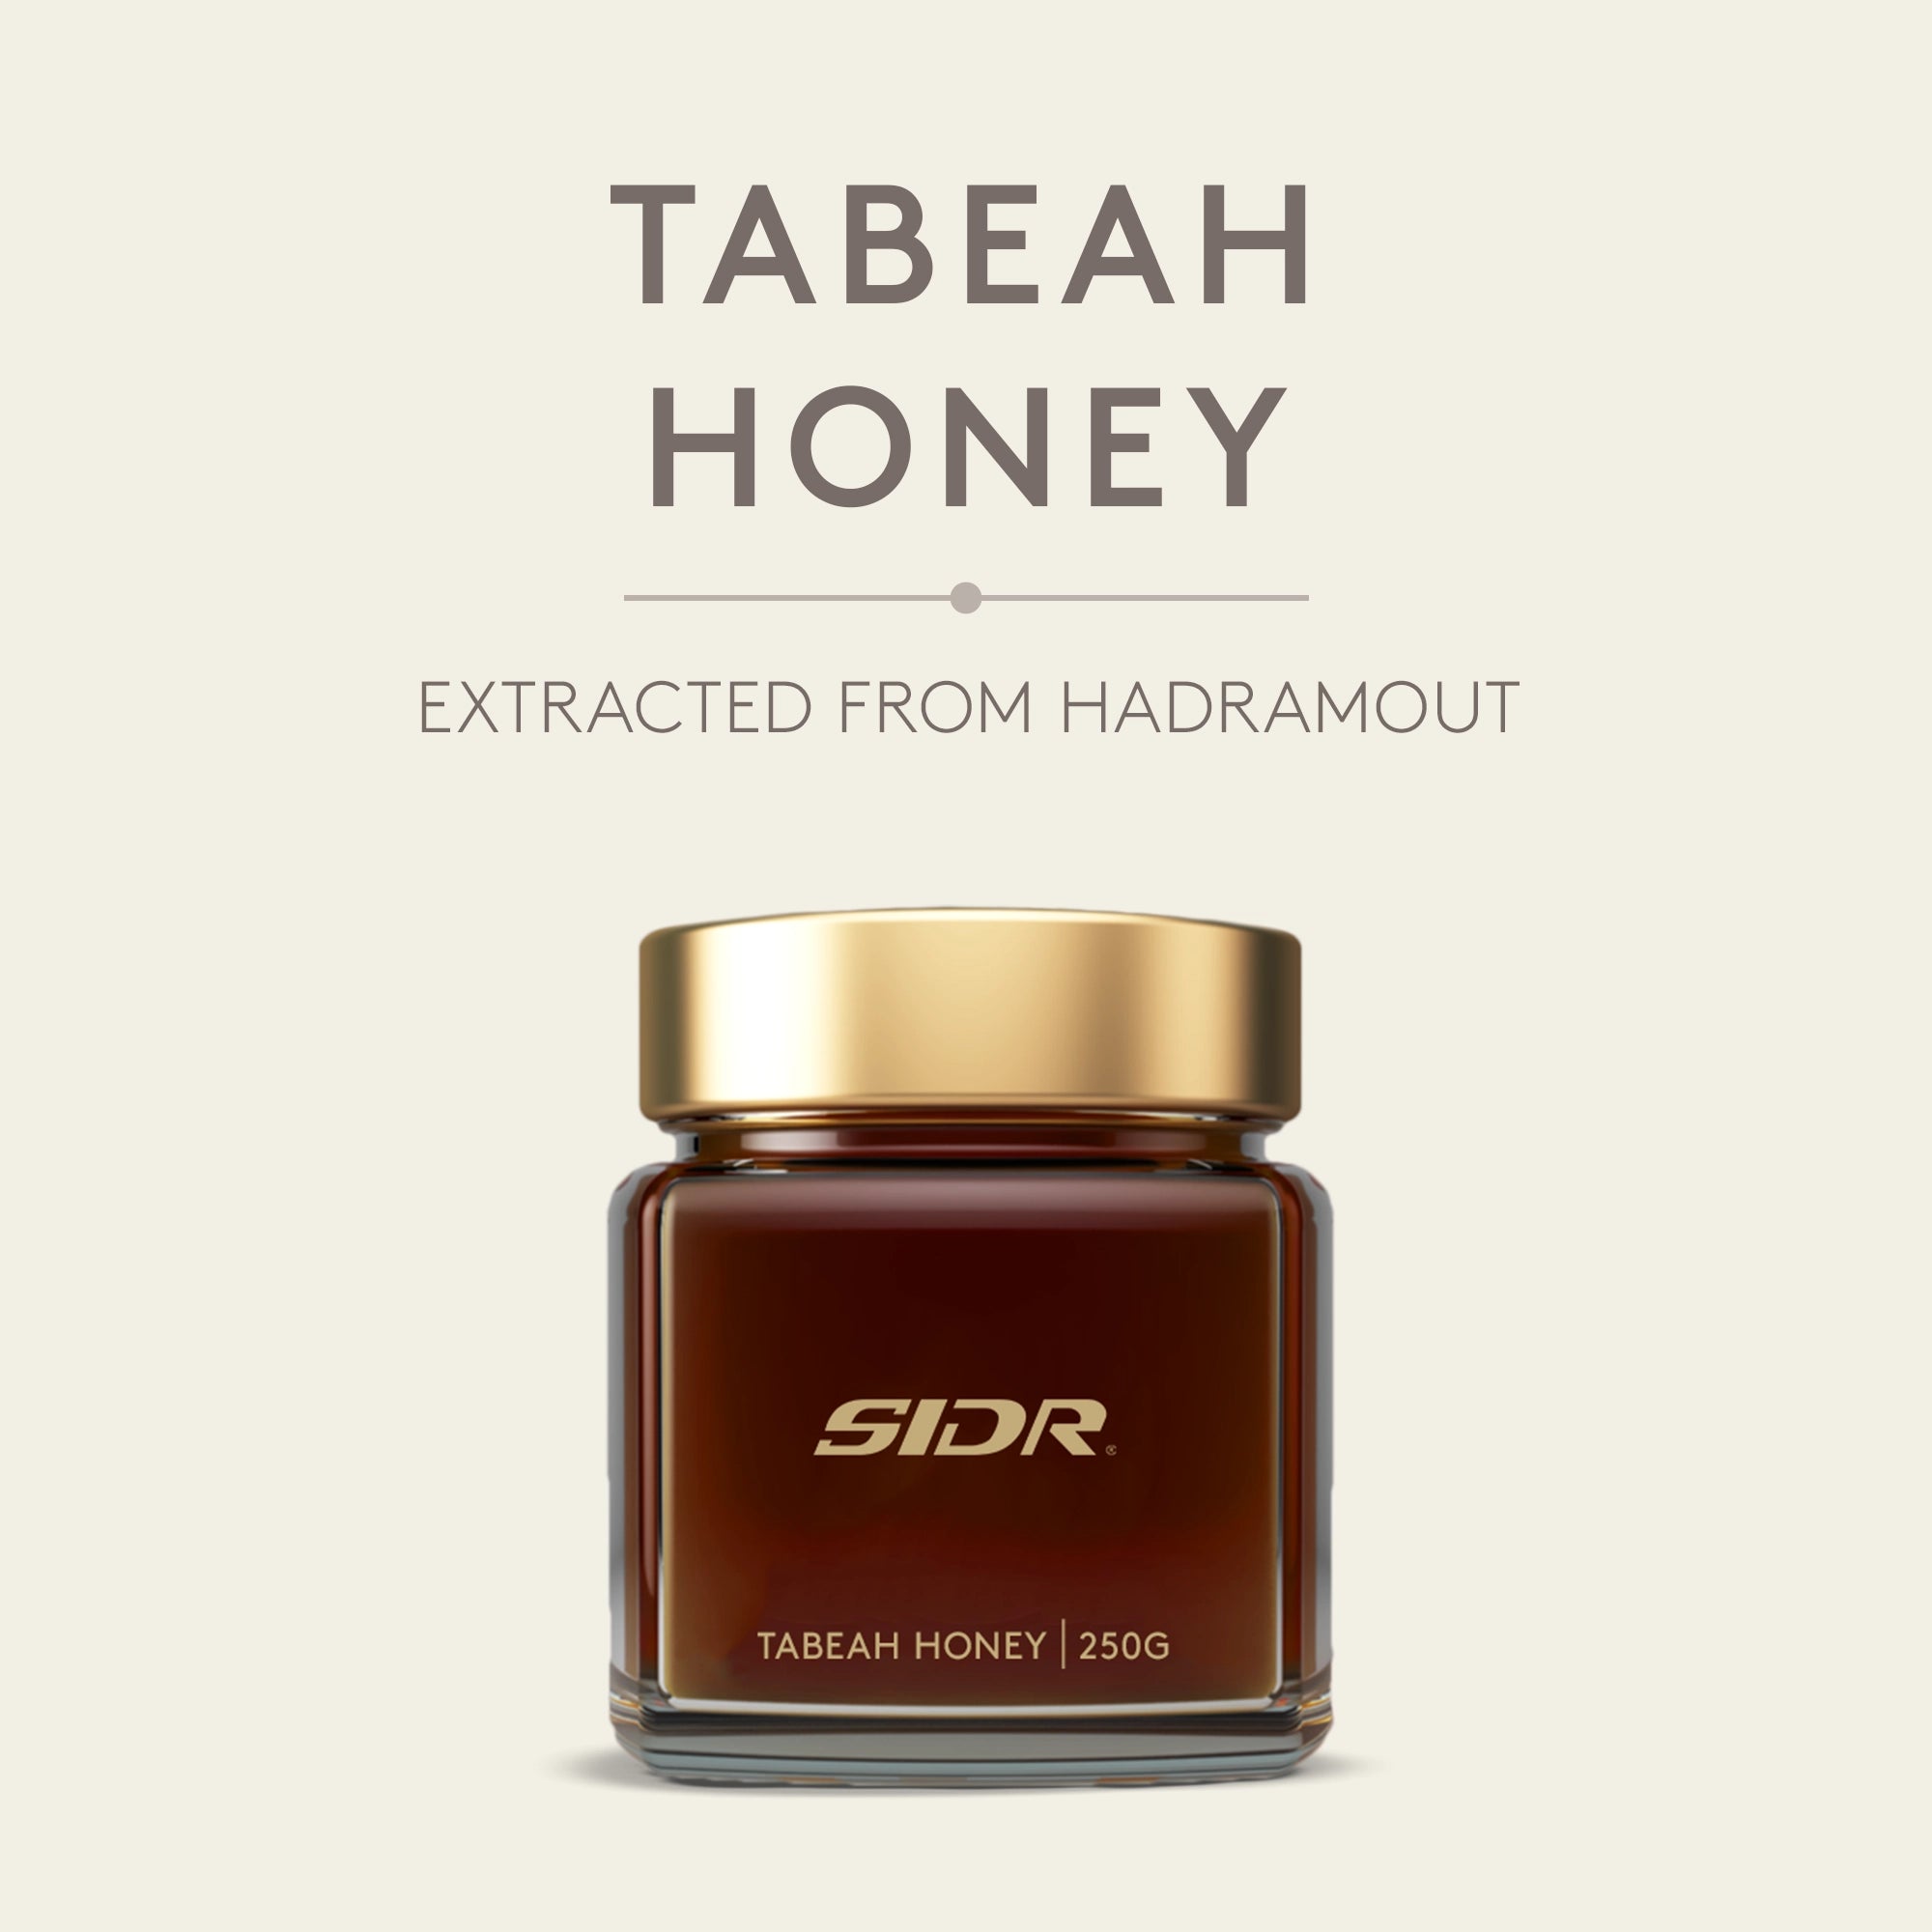 sidr tabeah honey from hadramout